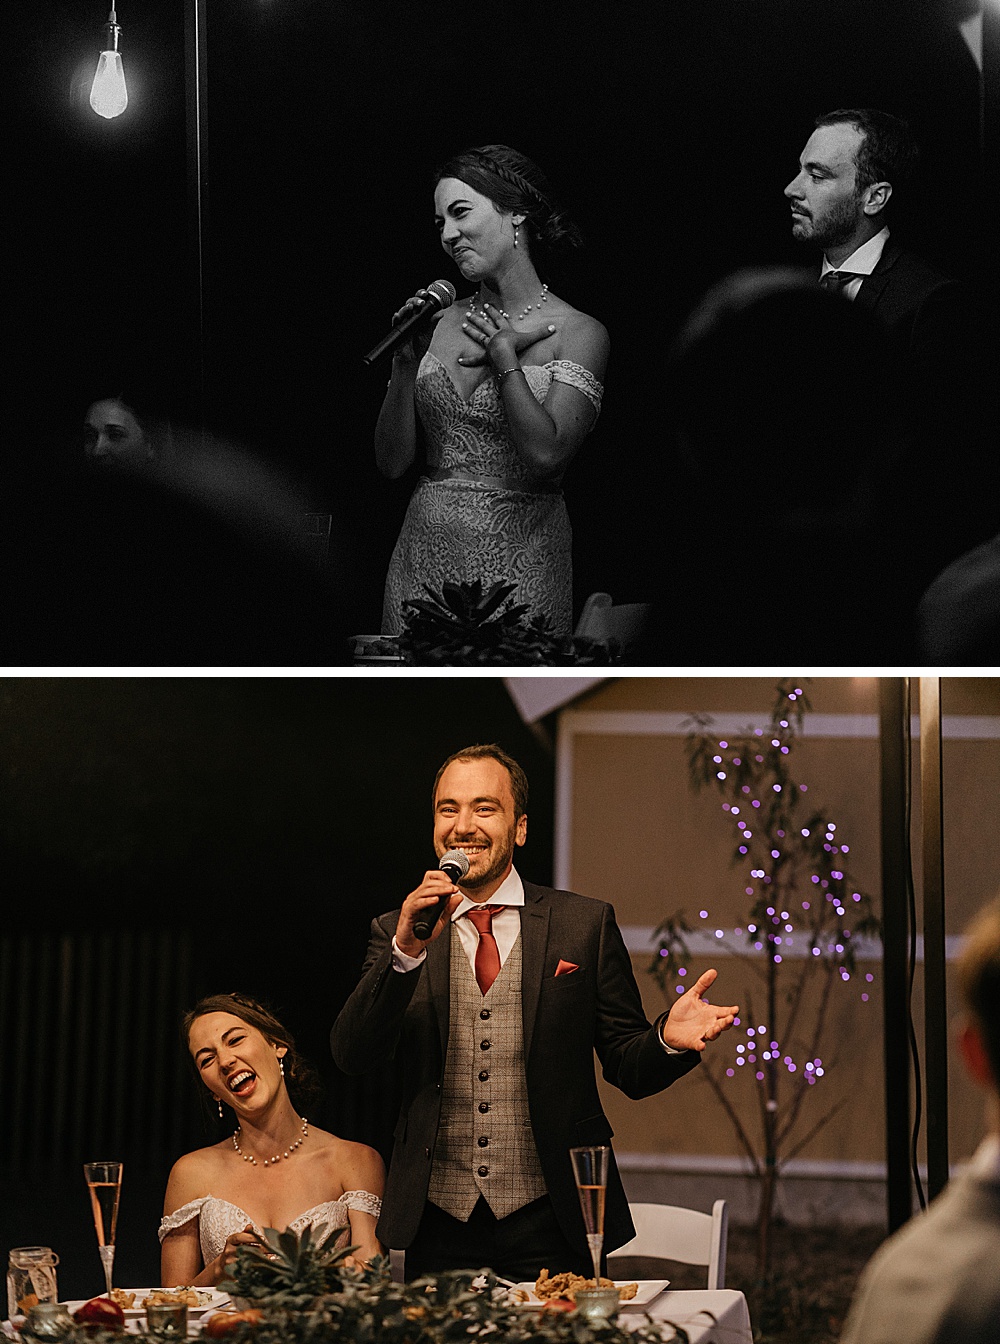 epic wedding speeches at rustic-chic California wedding by amy thompson photography